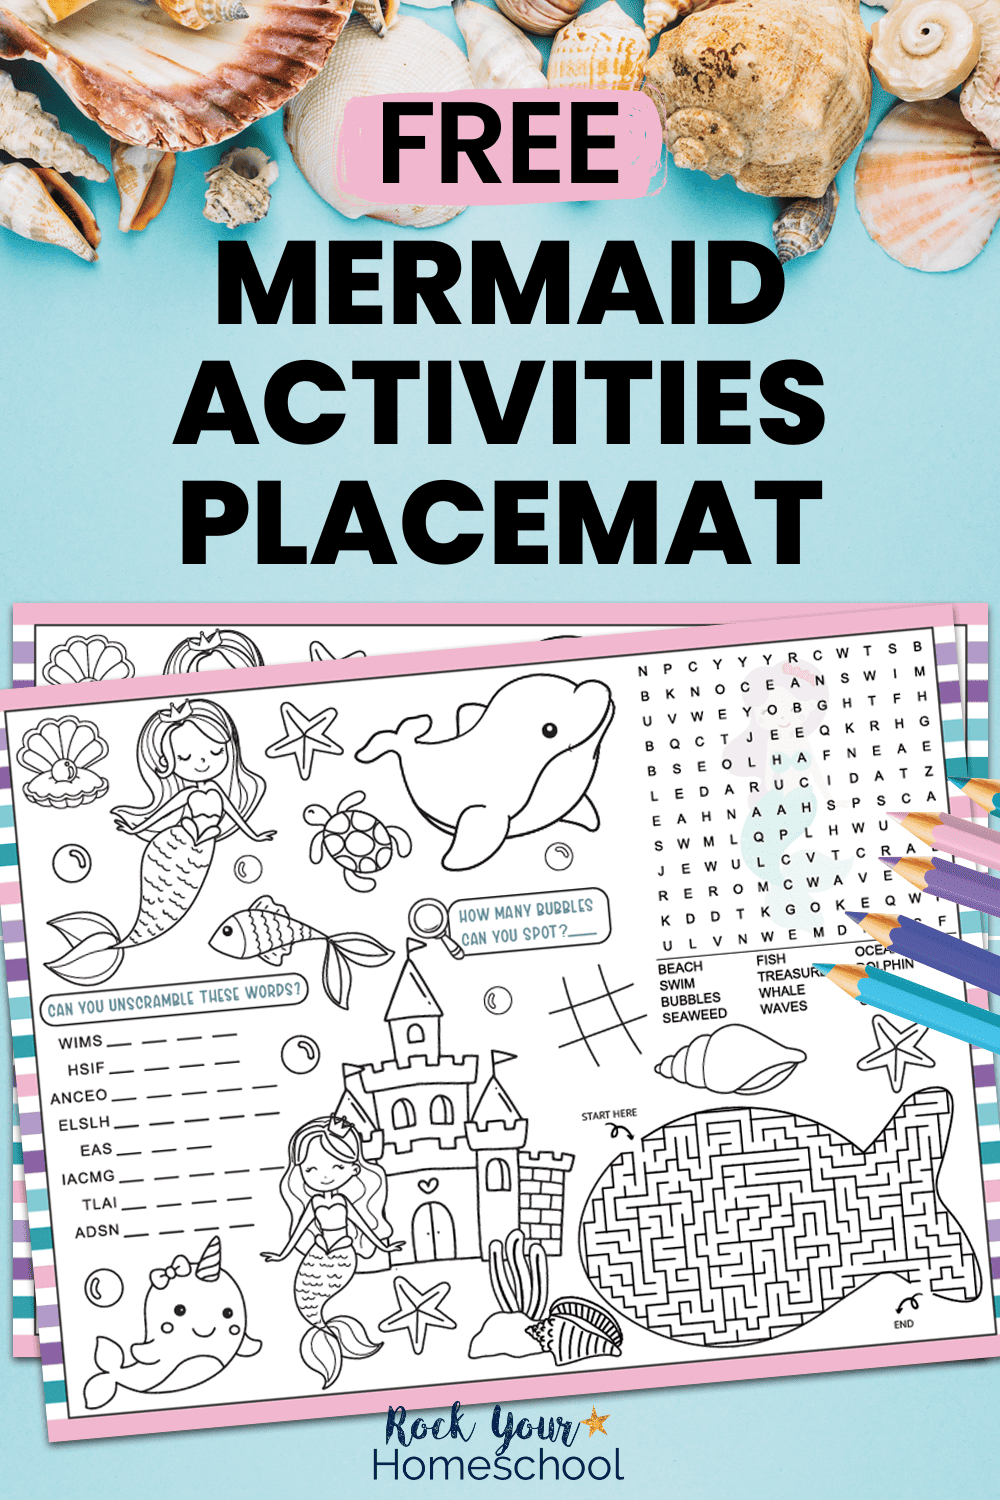 How to Catch a Mermaid Craft!